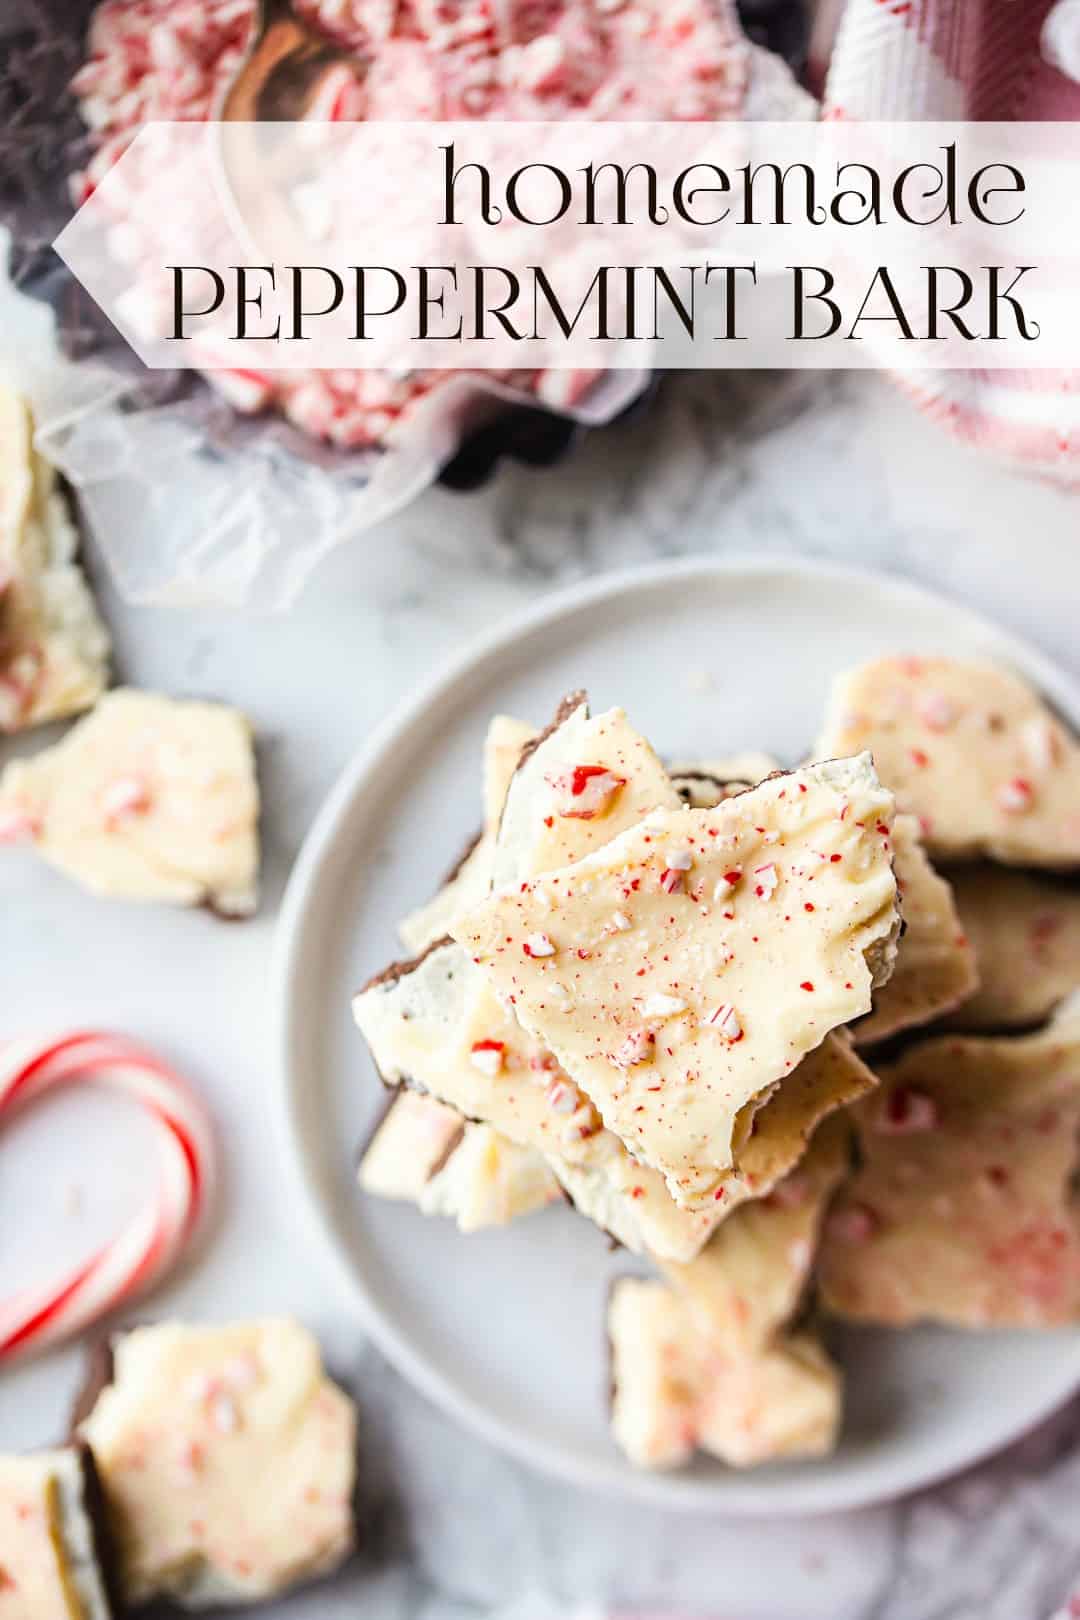 Overhead image of peppermint bark stacked on a plate with a text overlay above that reads "Homemade Peppermint Bark."